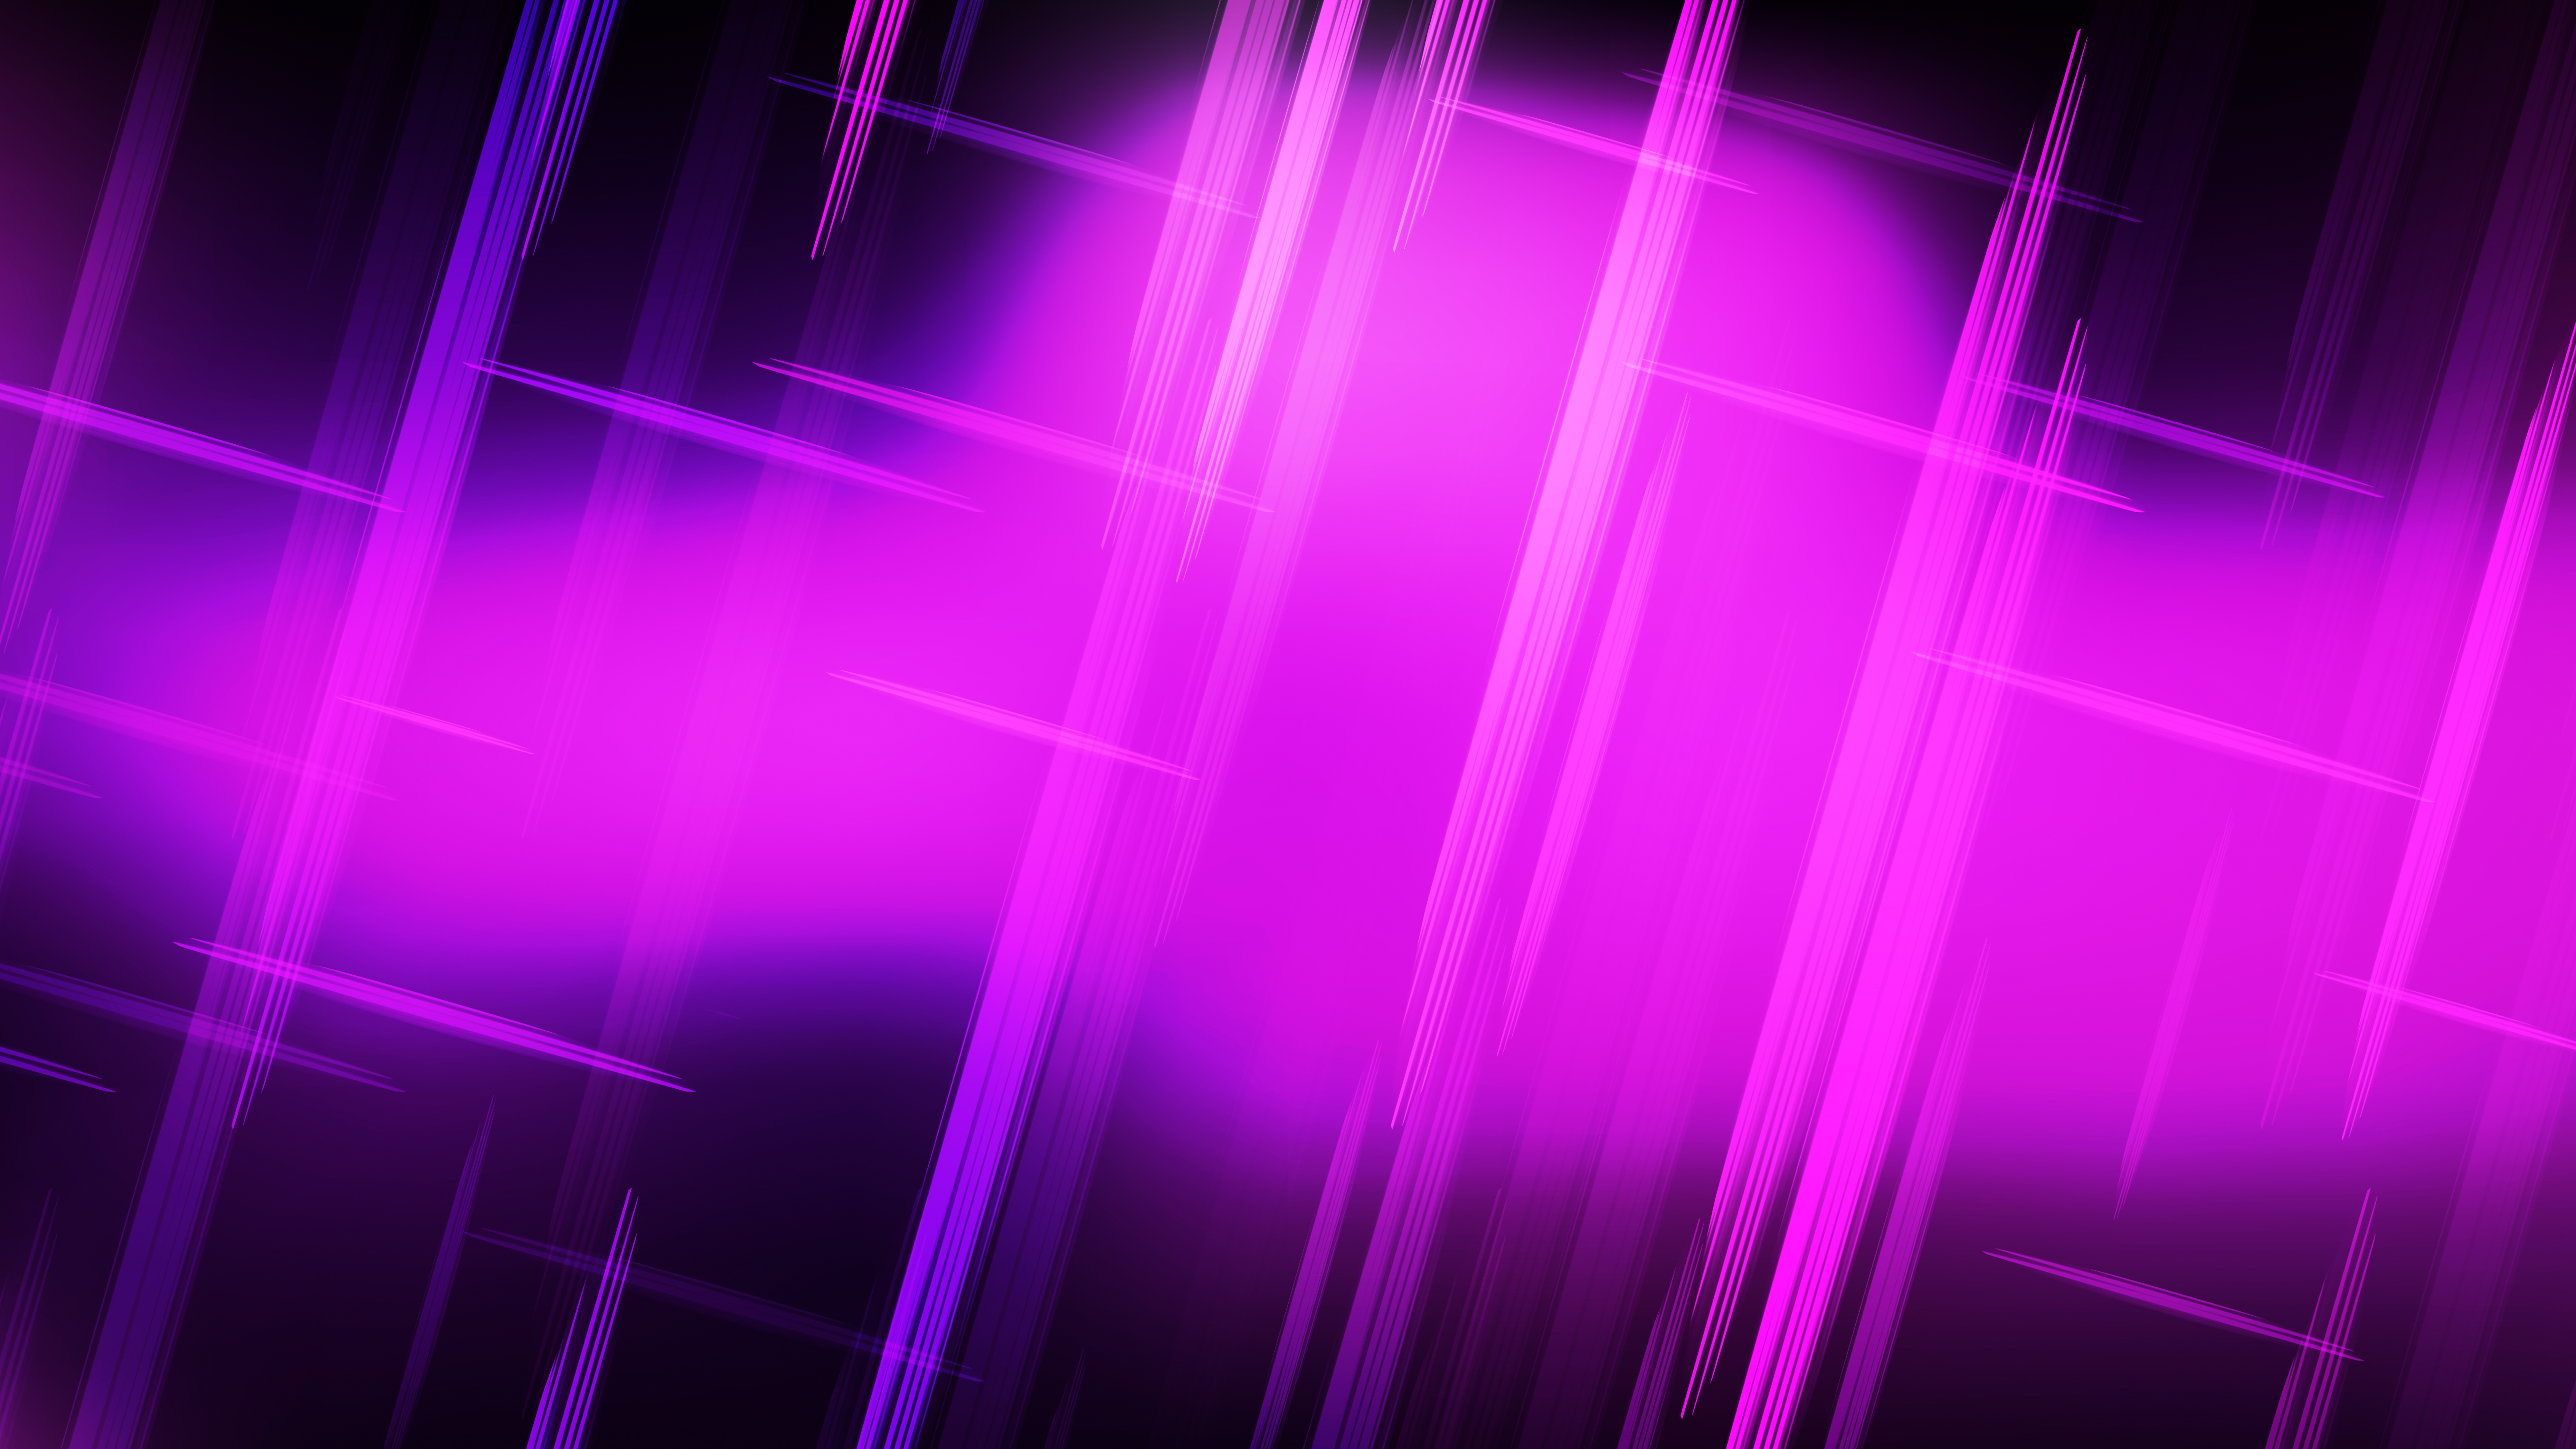 Purple And Black Futuristic Background. Download High Resolution Free ImageFreevectors